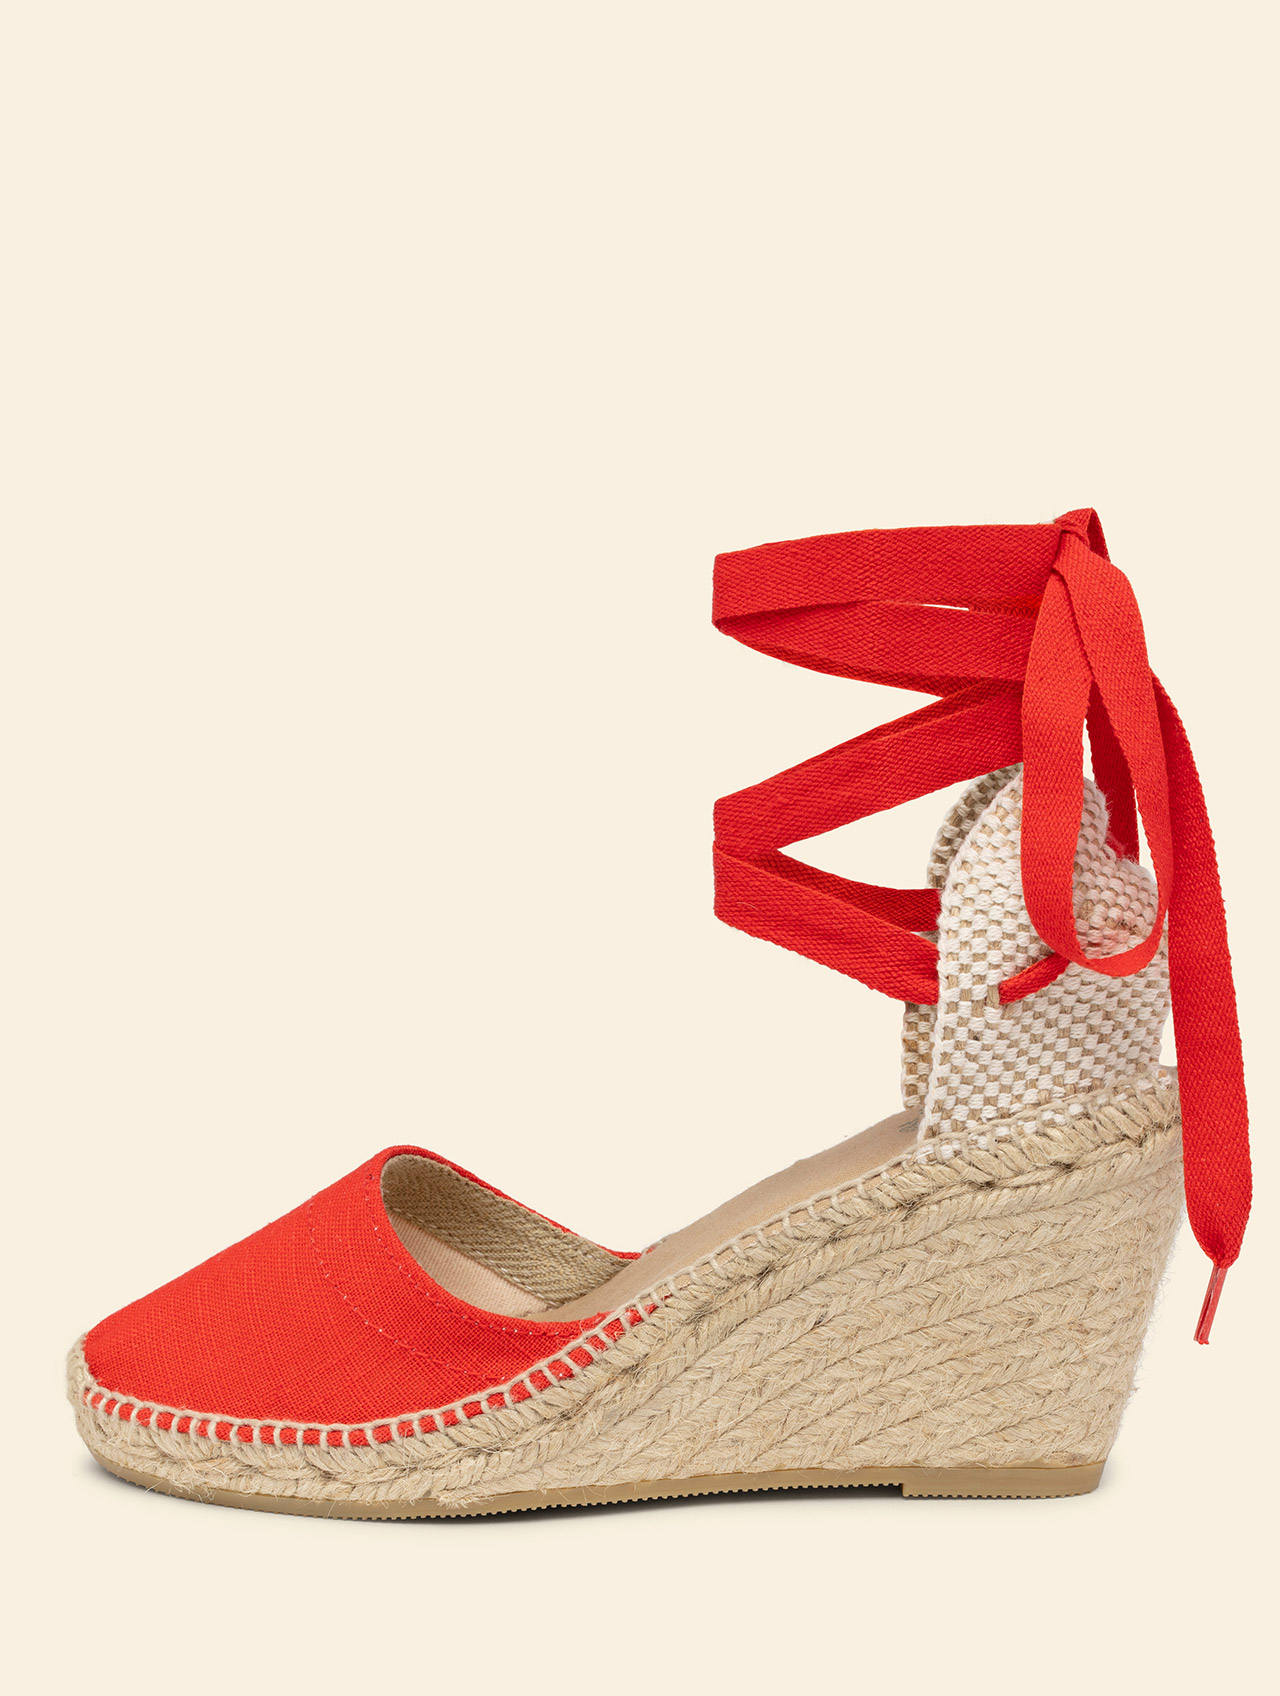 Natural jute wedge espadrille about 9 centimeters high, rounded and low-cut closed toe, with ribbons to tie at the ankle, padded insole for greater comfort.